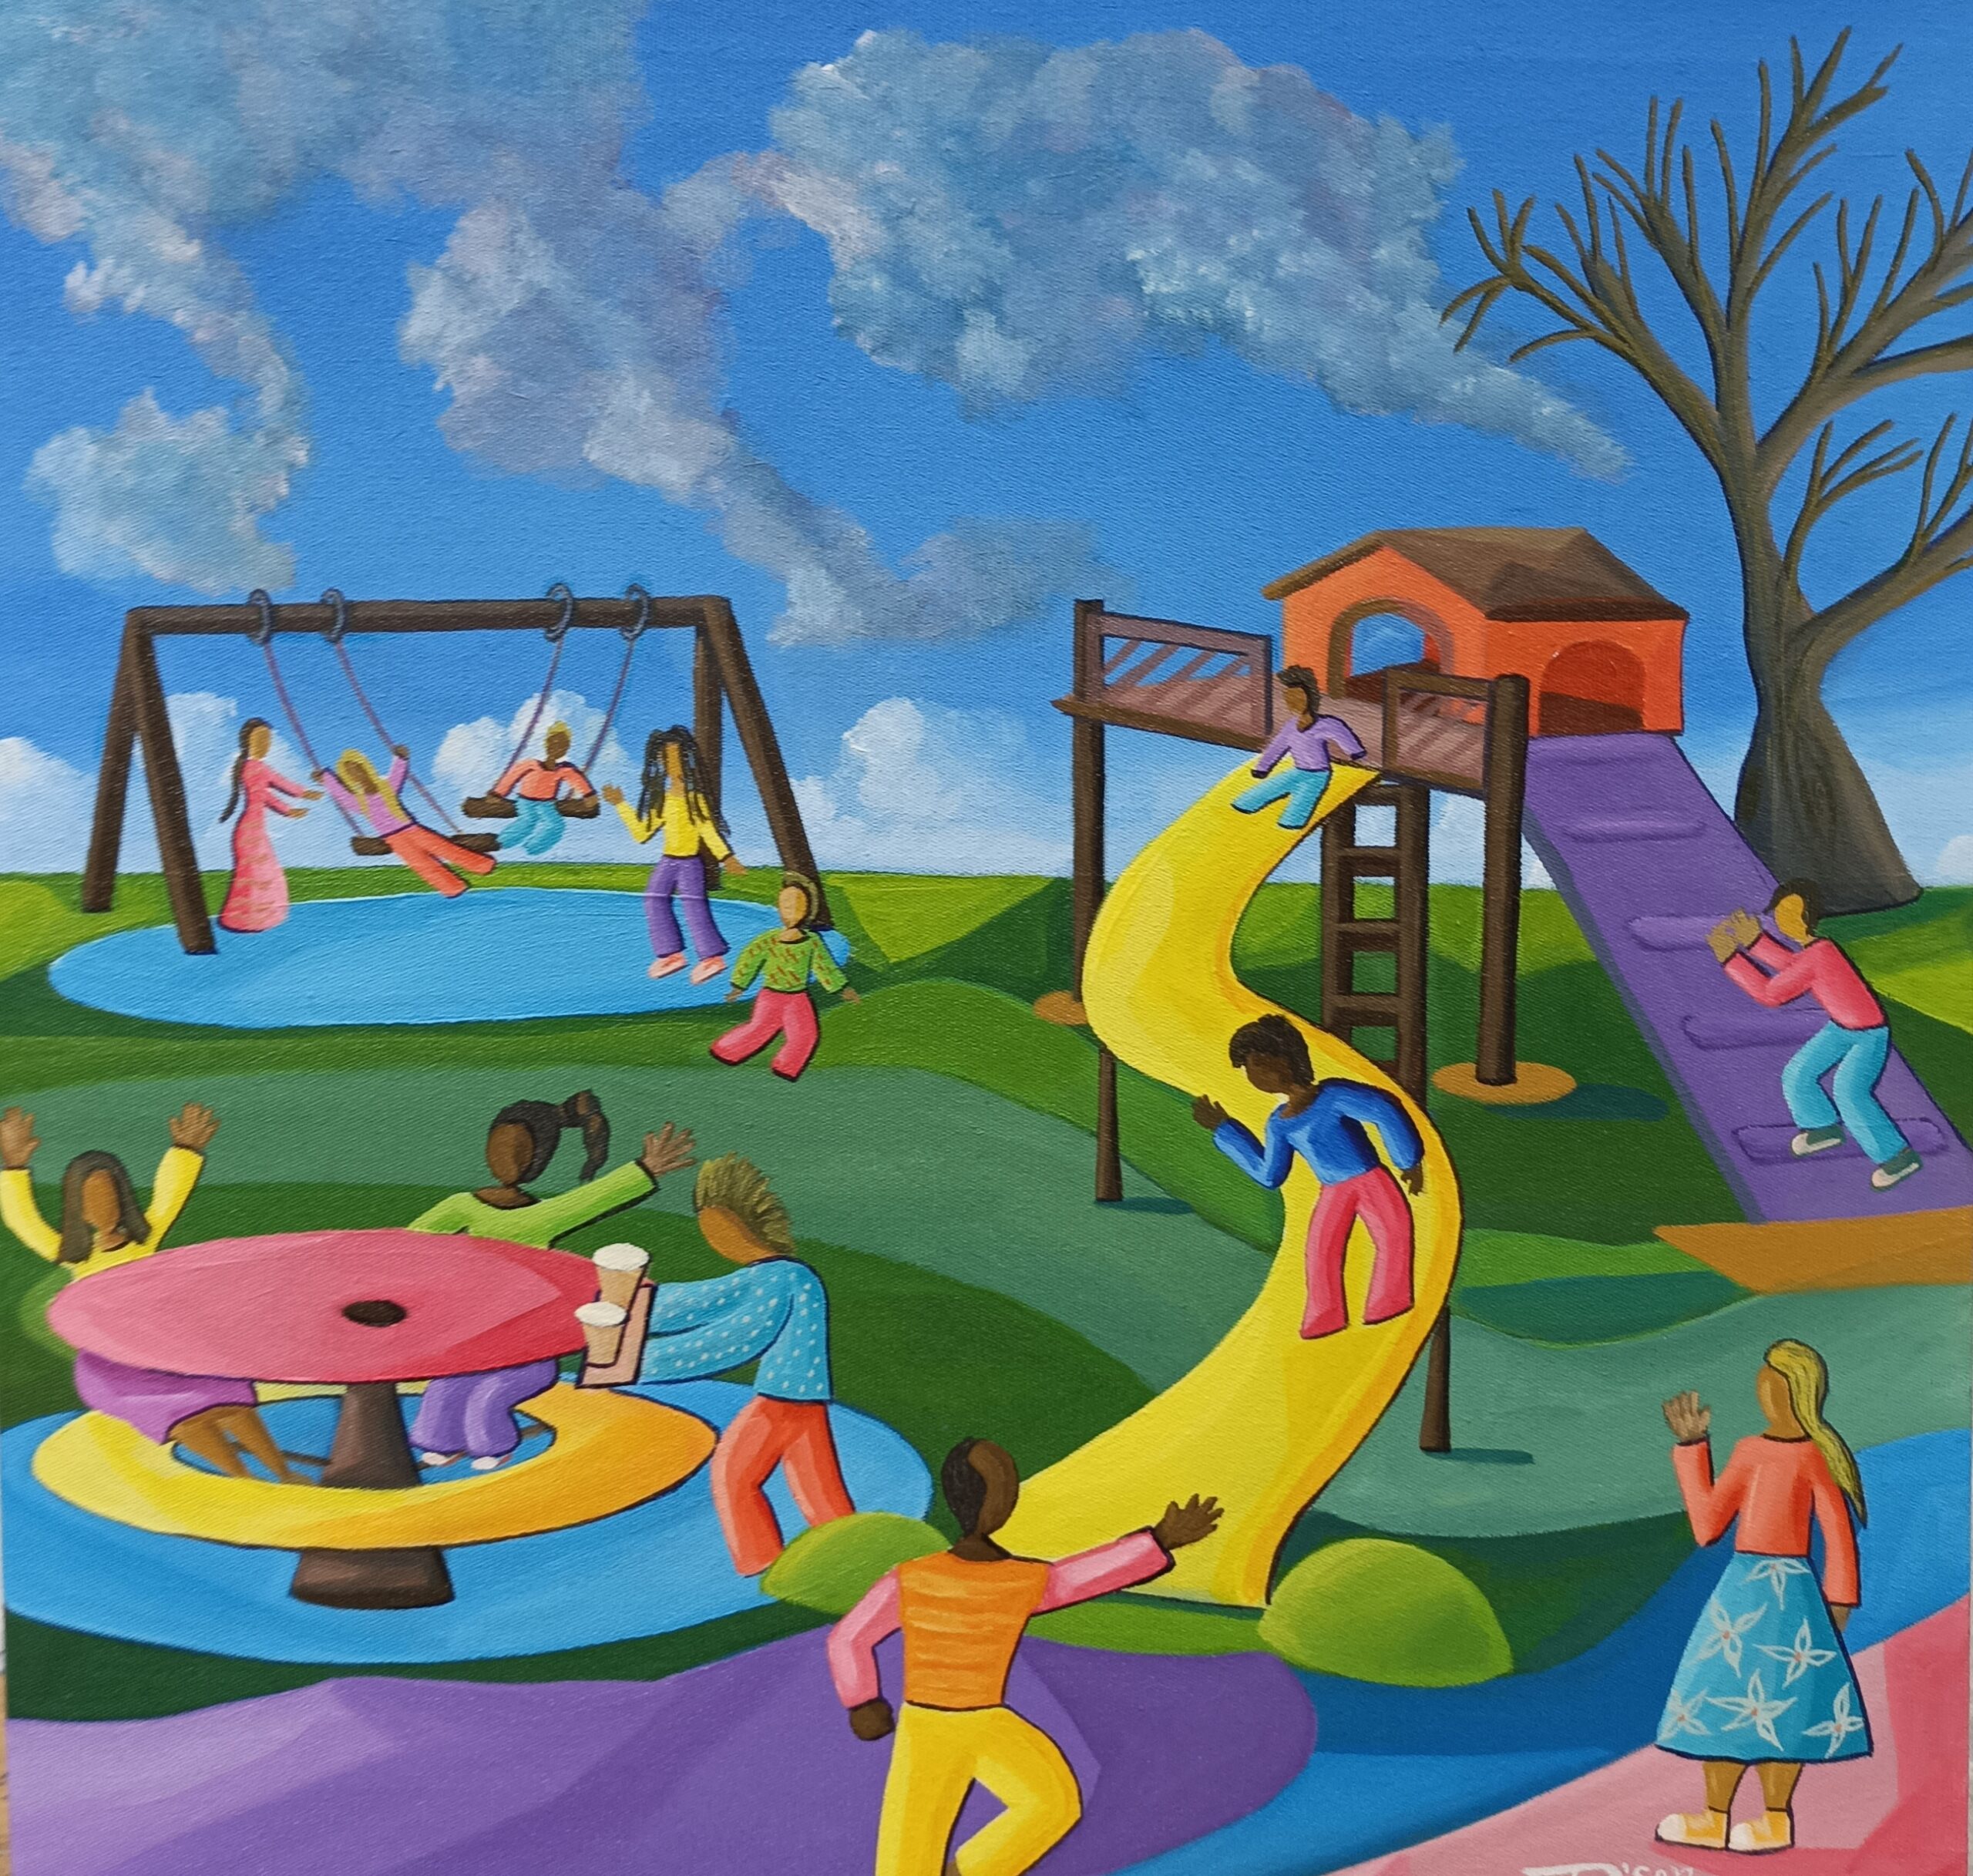 Painting inspired by taking my daughter to the playgrounds